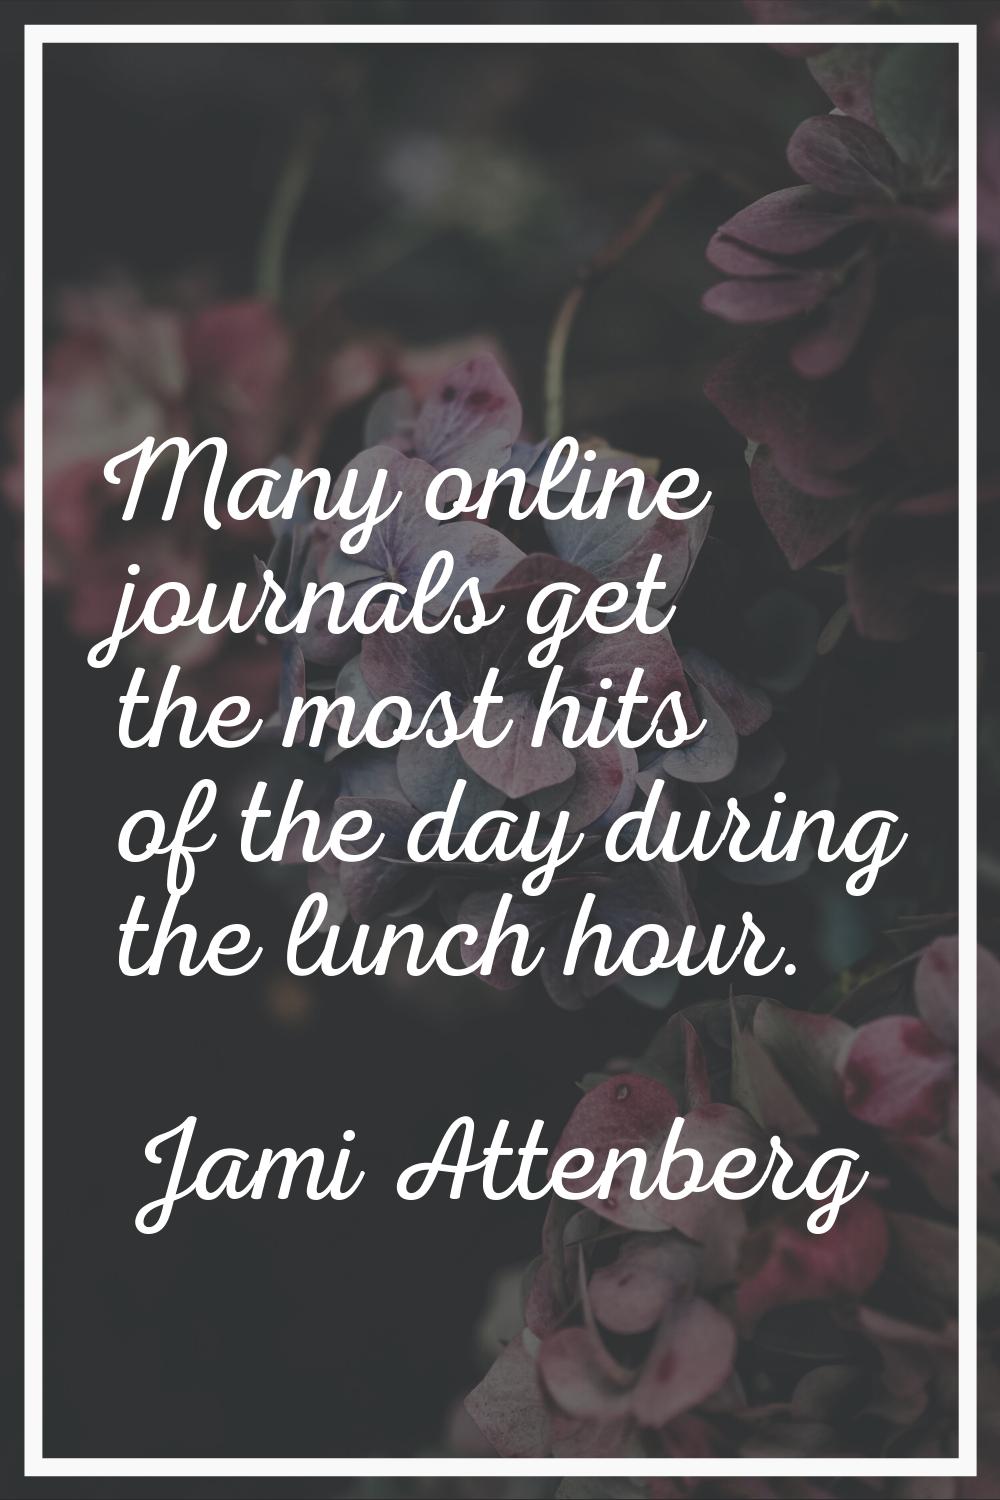 Many online journals get the most hits of the day during the lunch hour.